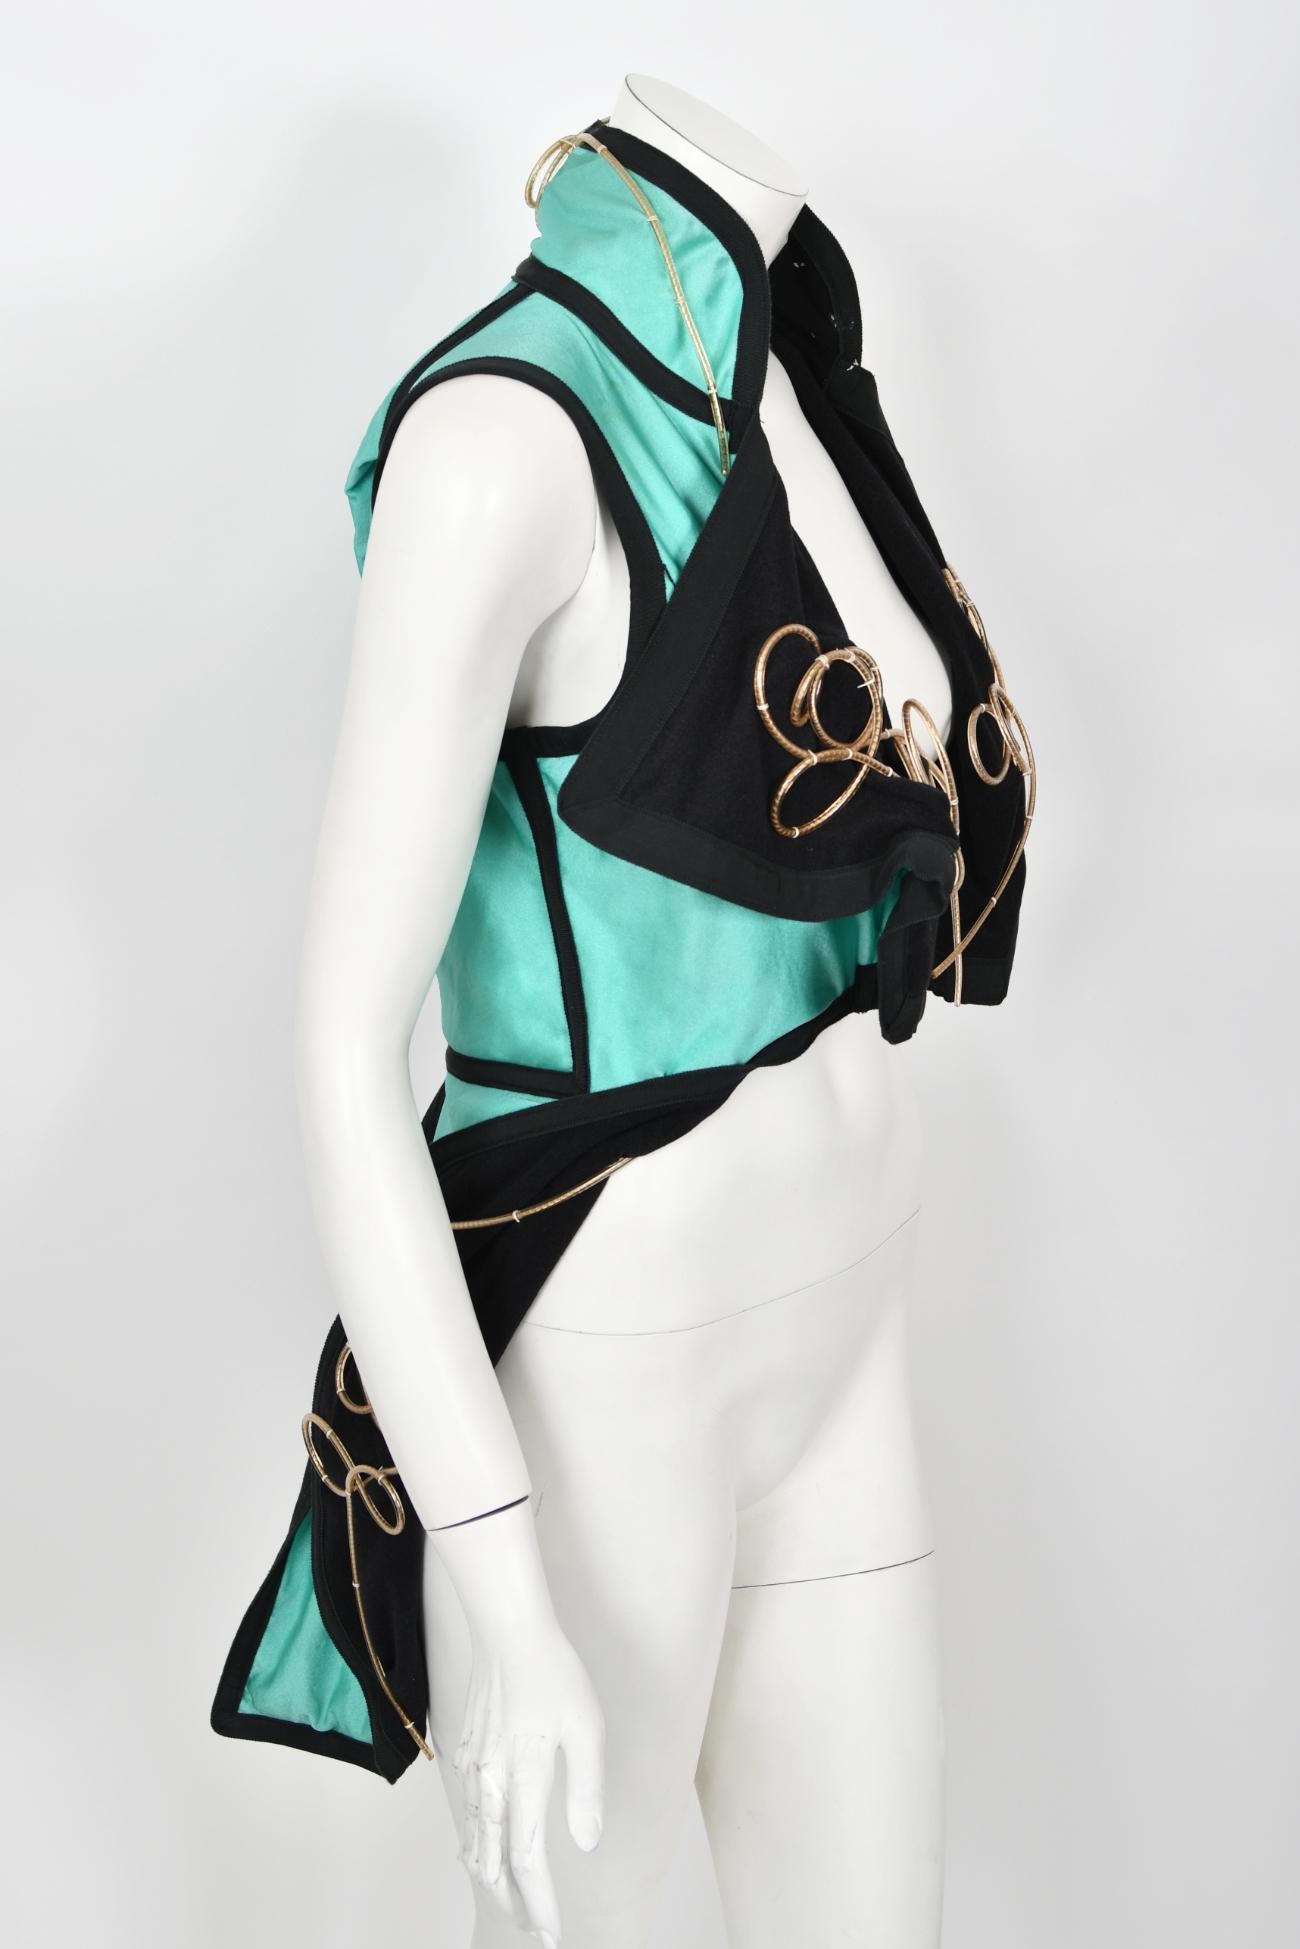 1991 John Galliano Documented Runway Black & Blue Military Inspired Cropped Vest 6